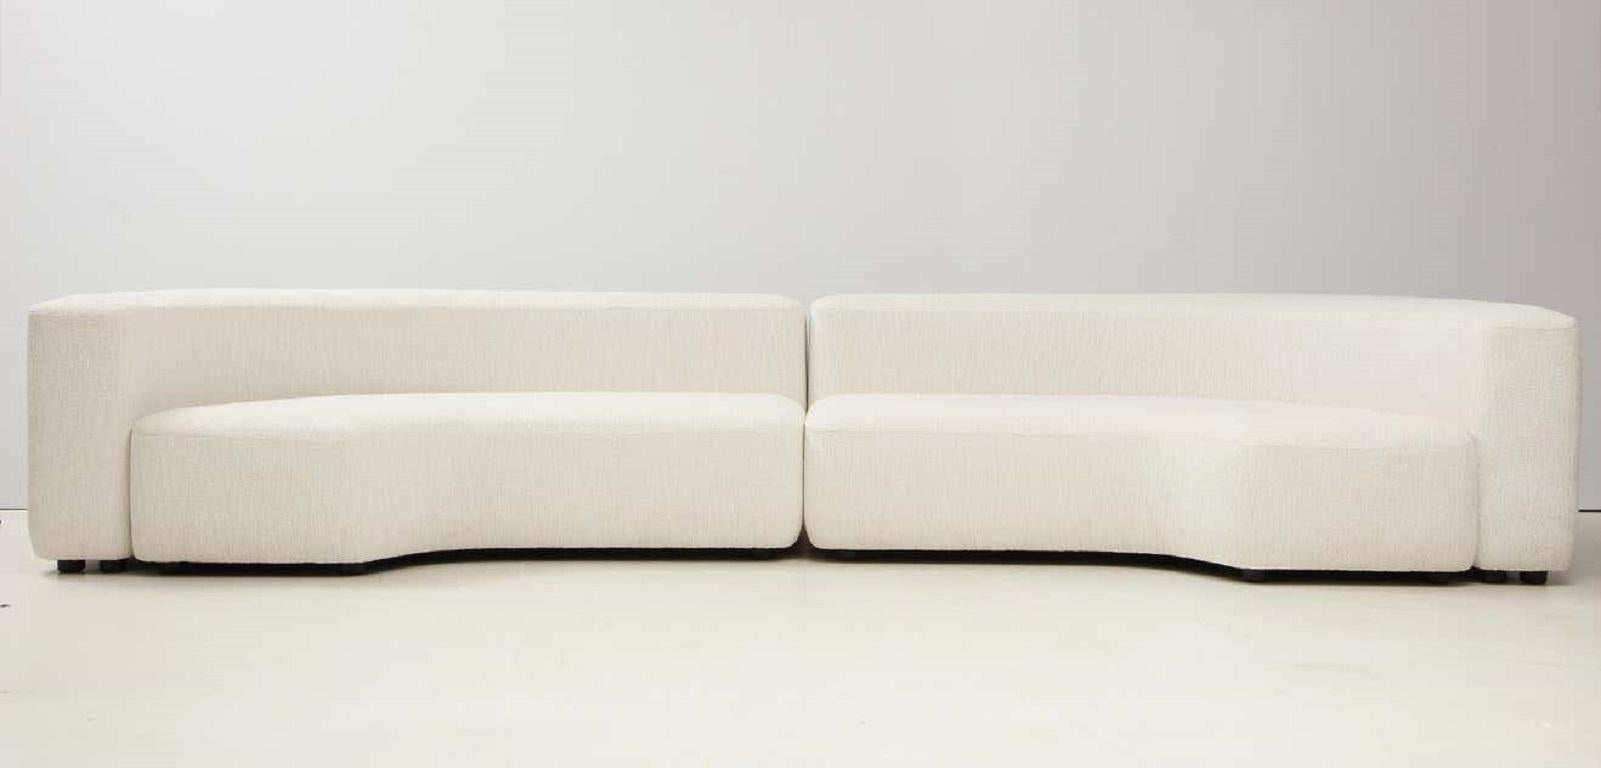 1960s Italian modular sofa attributed to Pamio, Massari & Toso (Designers) for Stillwood (maker) who were known for creating completely new forms following developments in foam technology in the 1950s and 1960s. This iconic low modular sofa consists